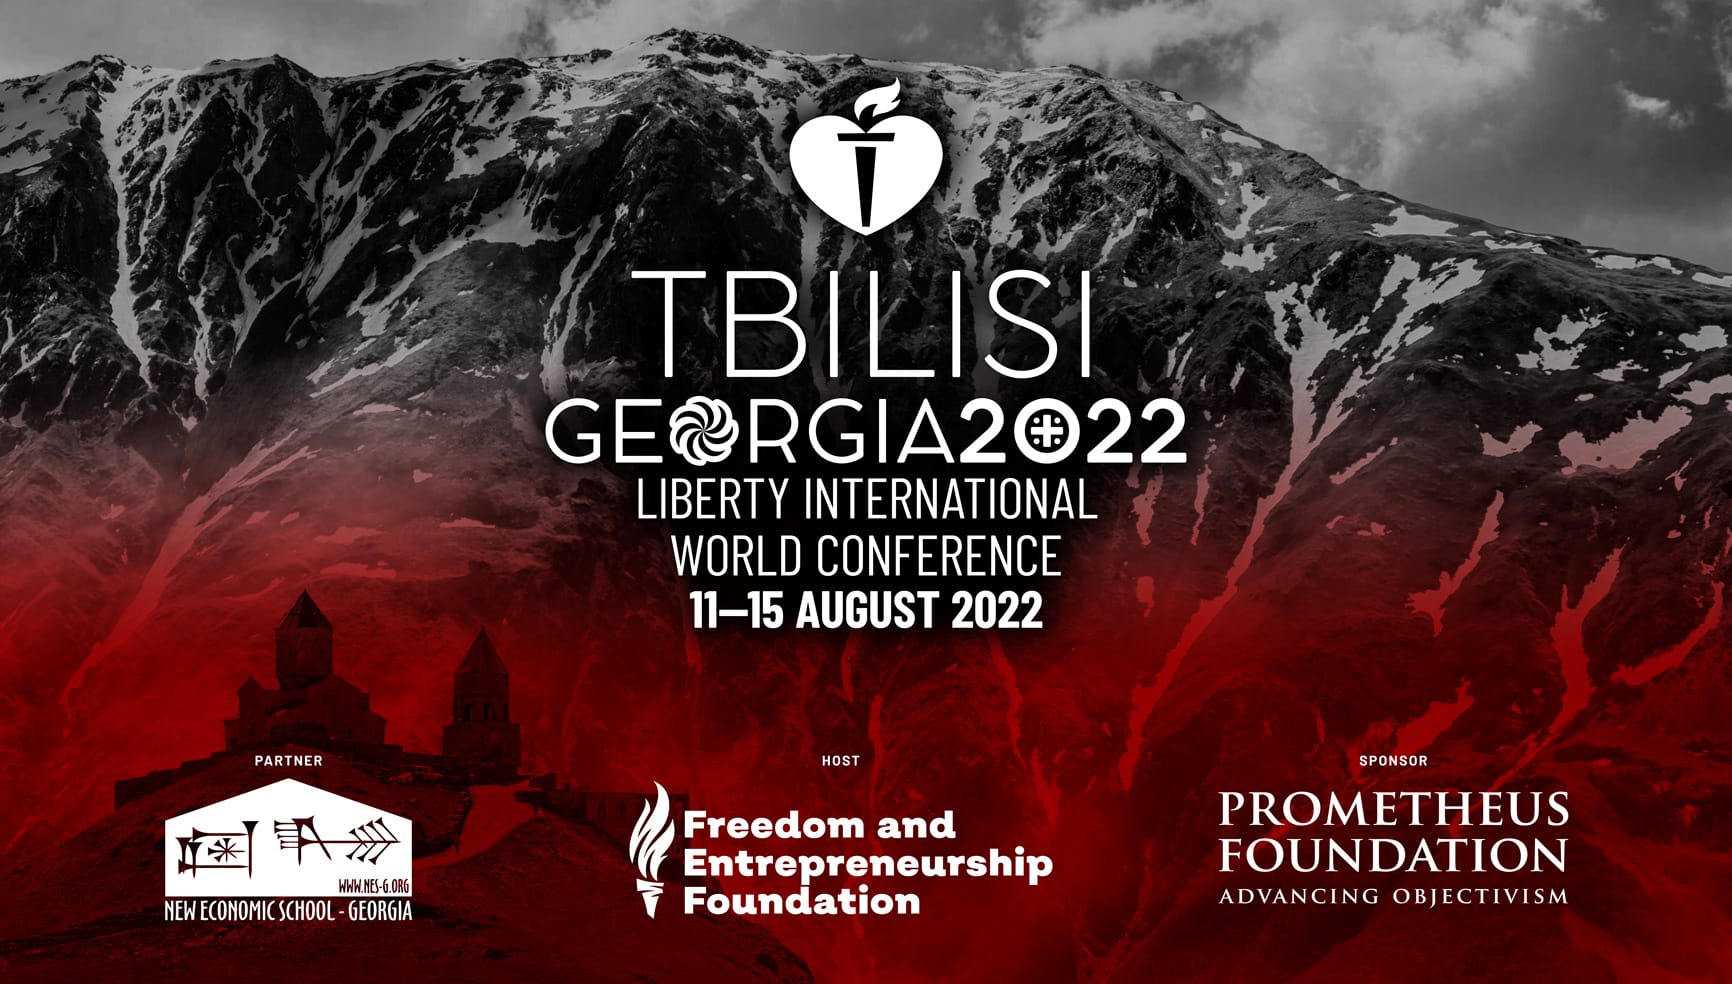 Liberty International World Conference Tbilisi 2022 starts in a week!